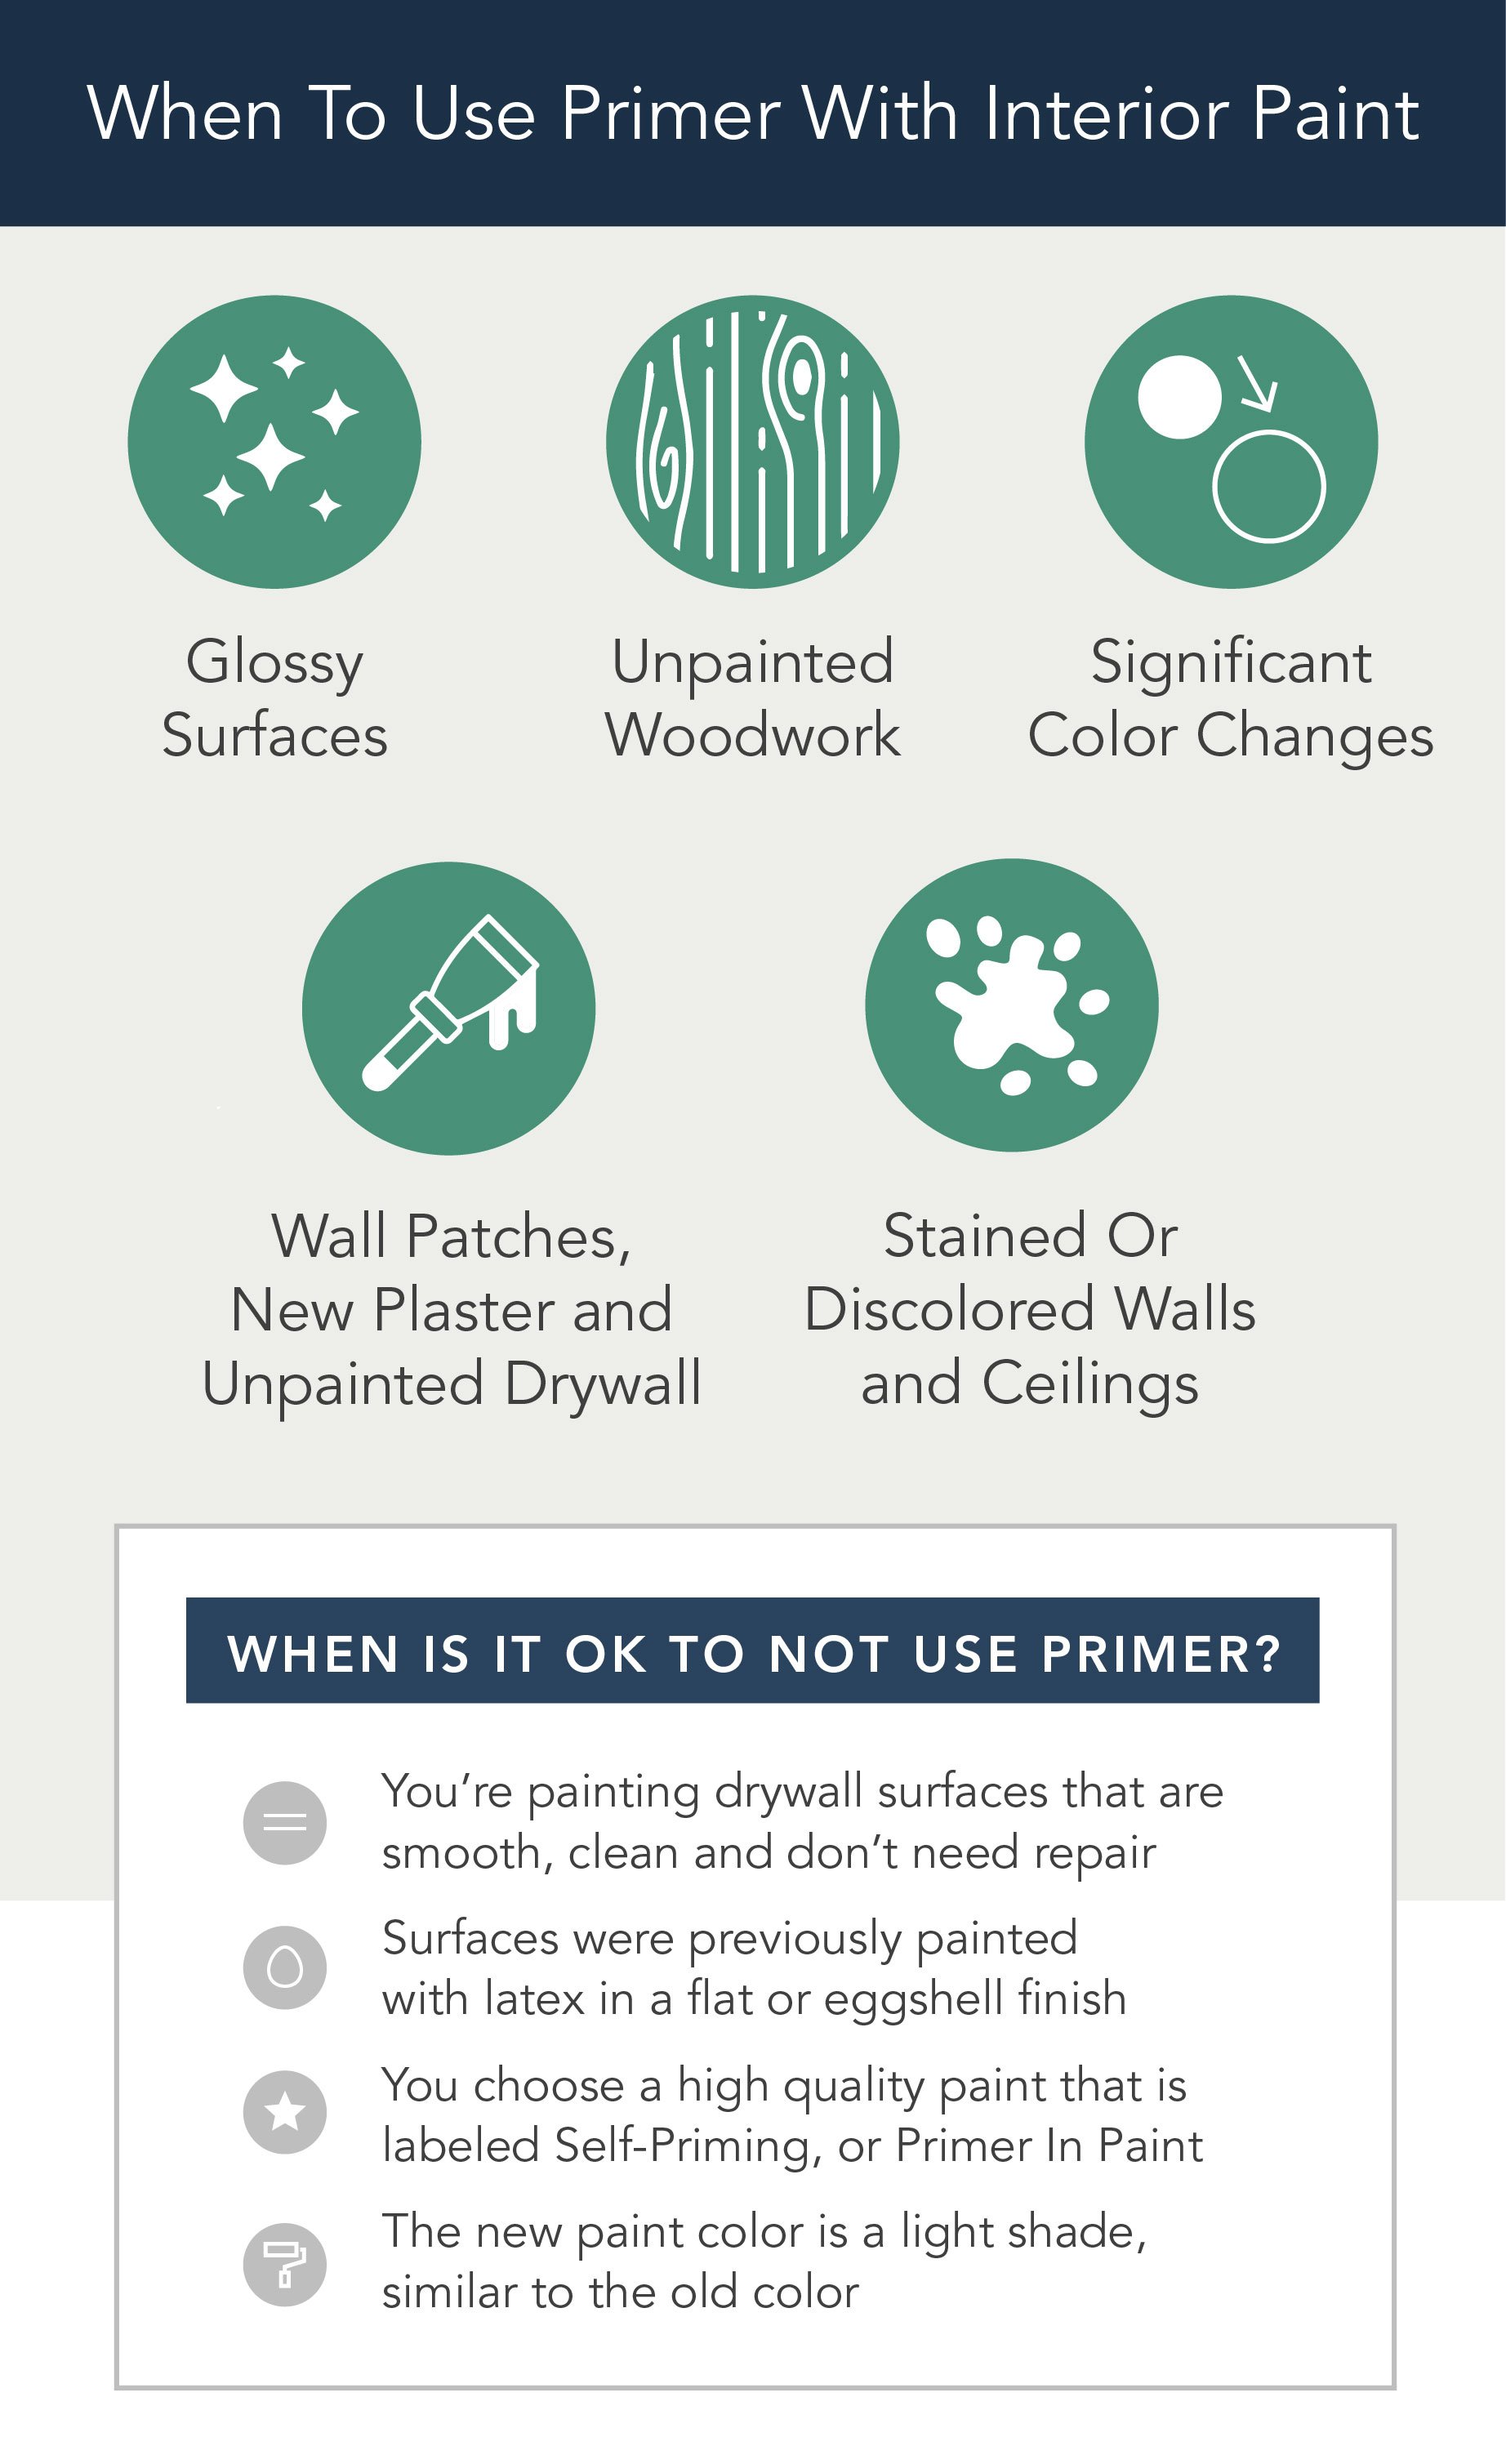 Checklist of situations when it's ok to not use primer when painting